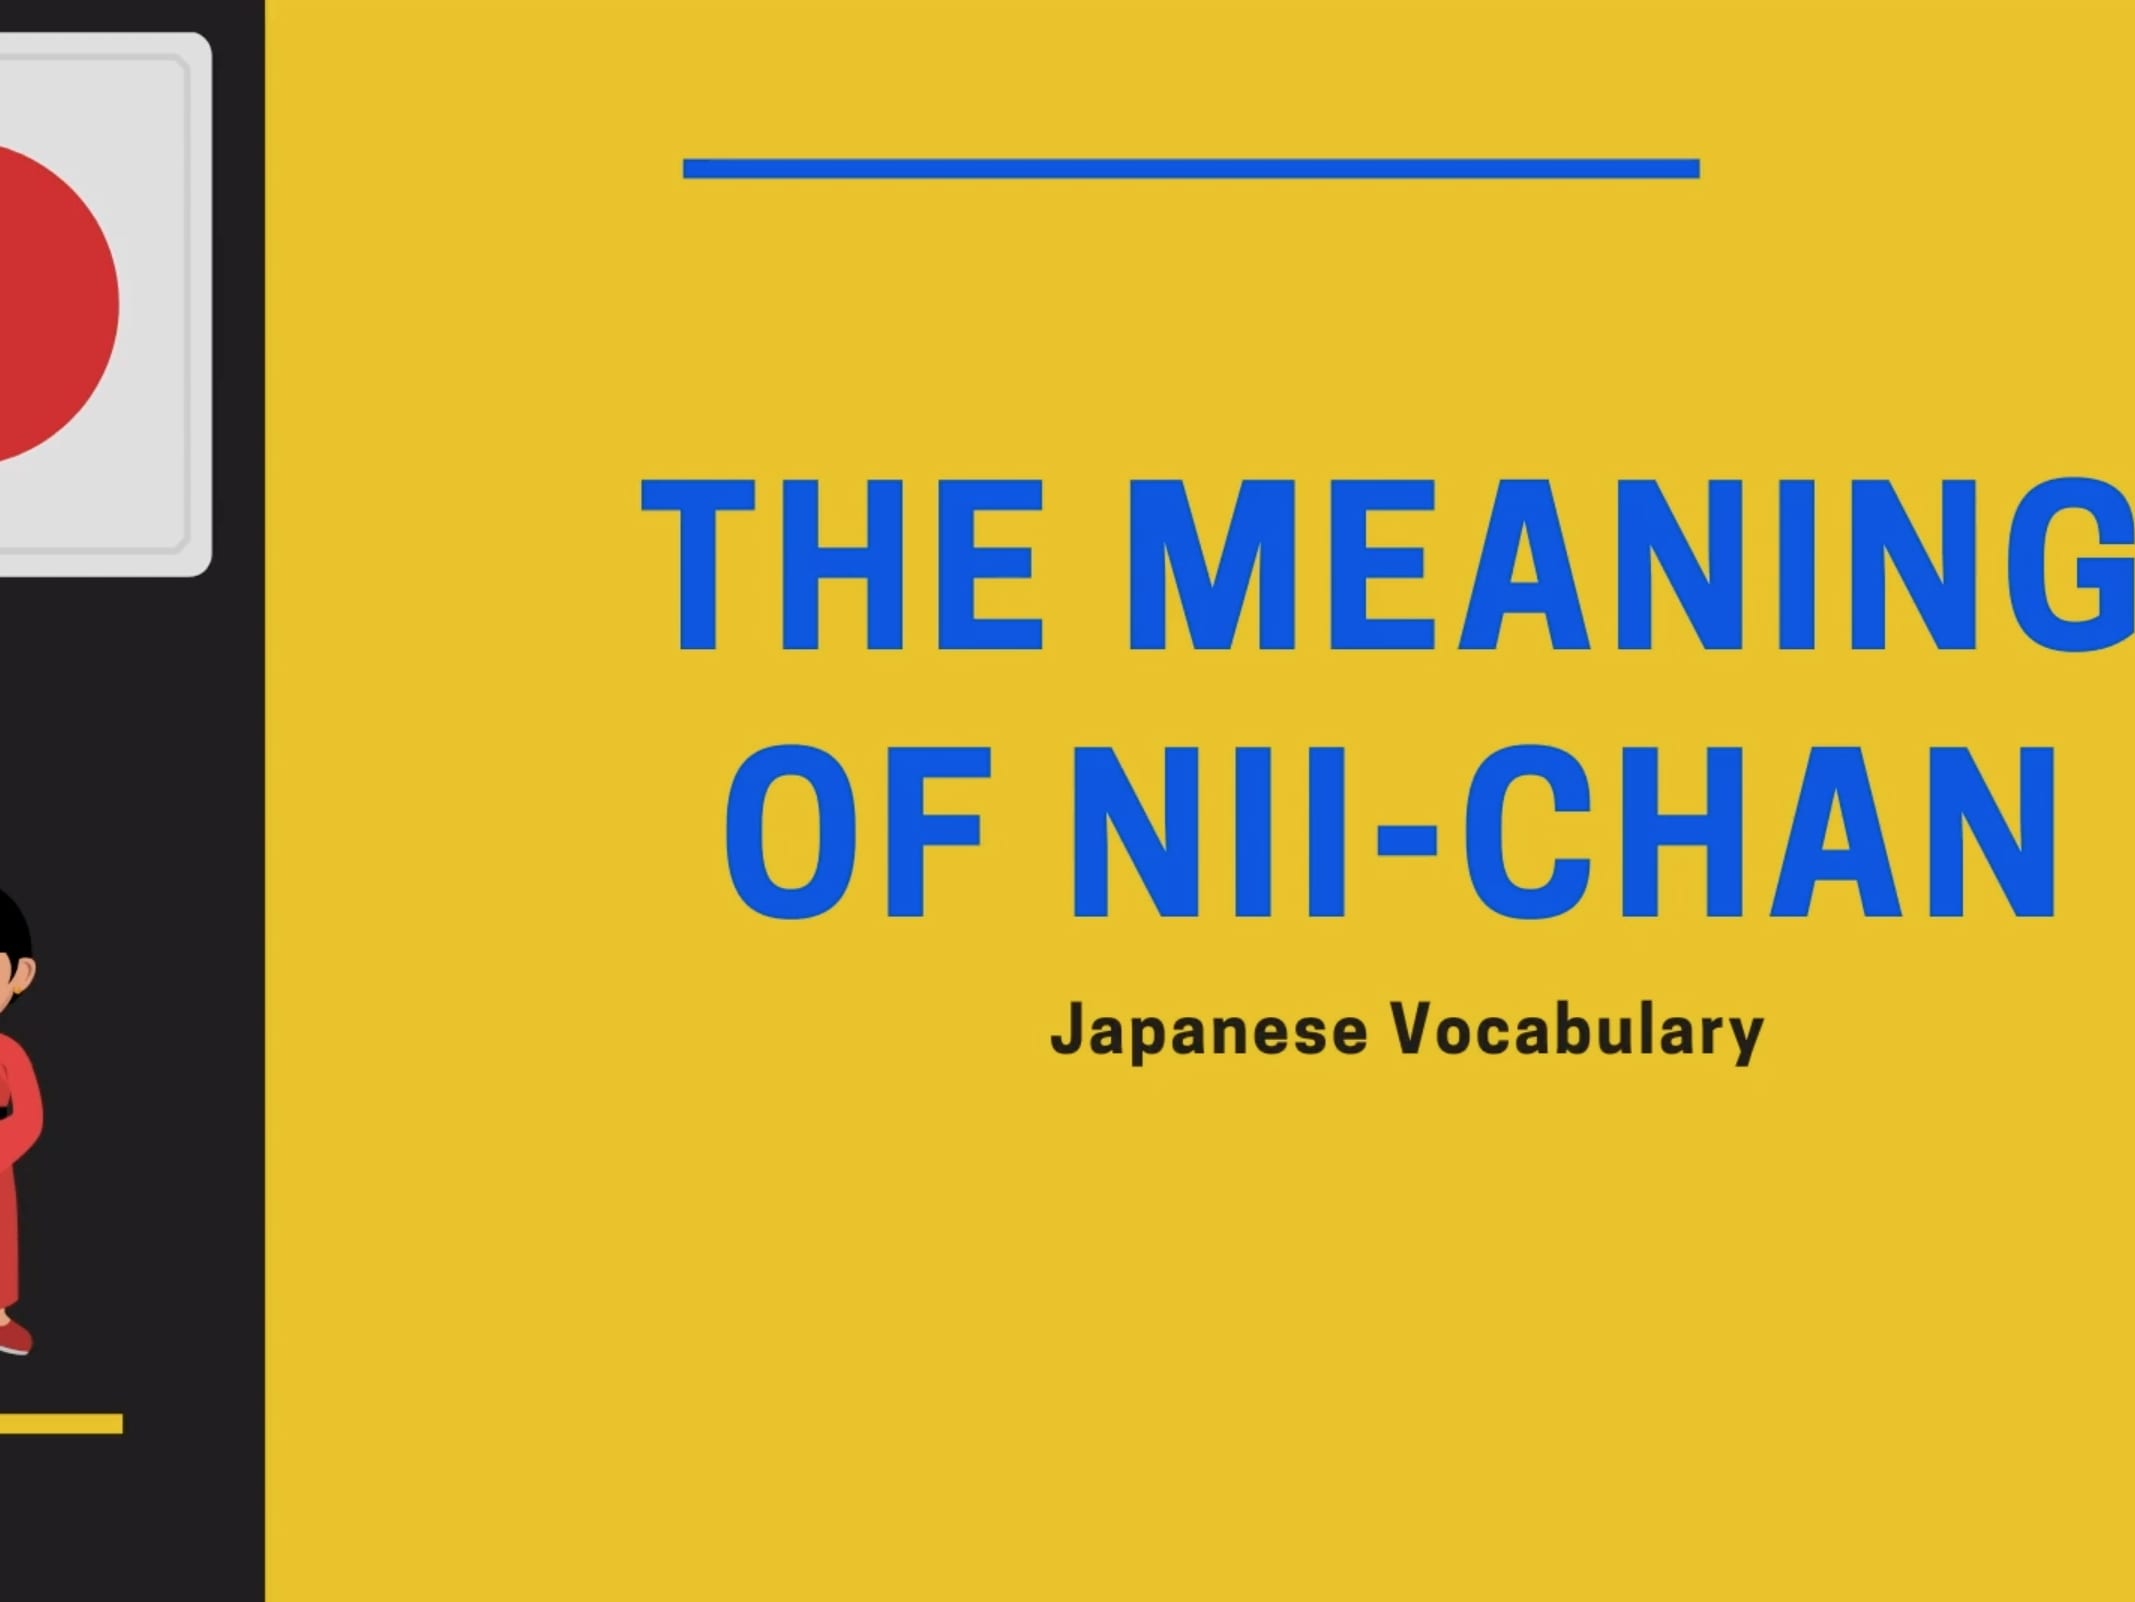 Nii-chan meaning